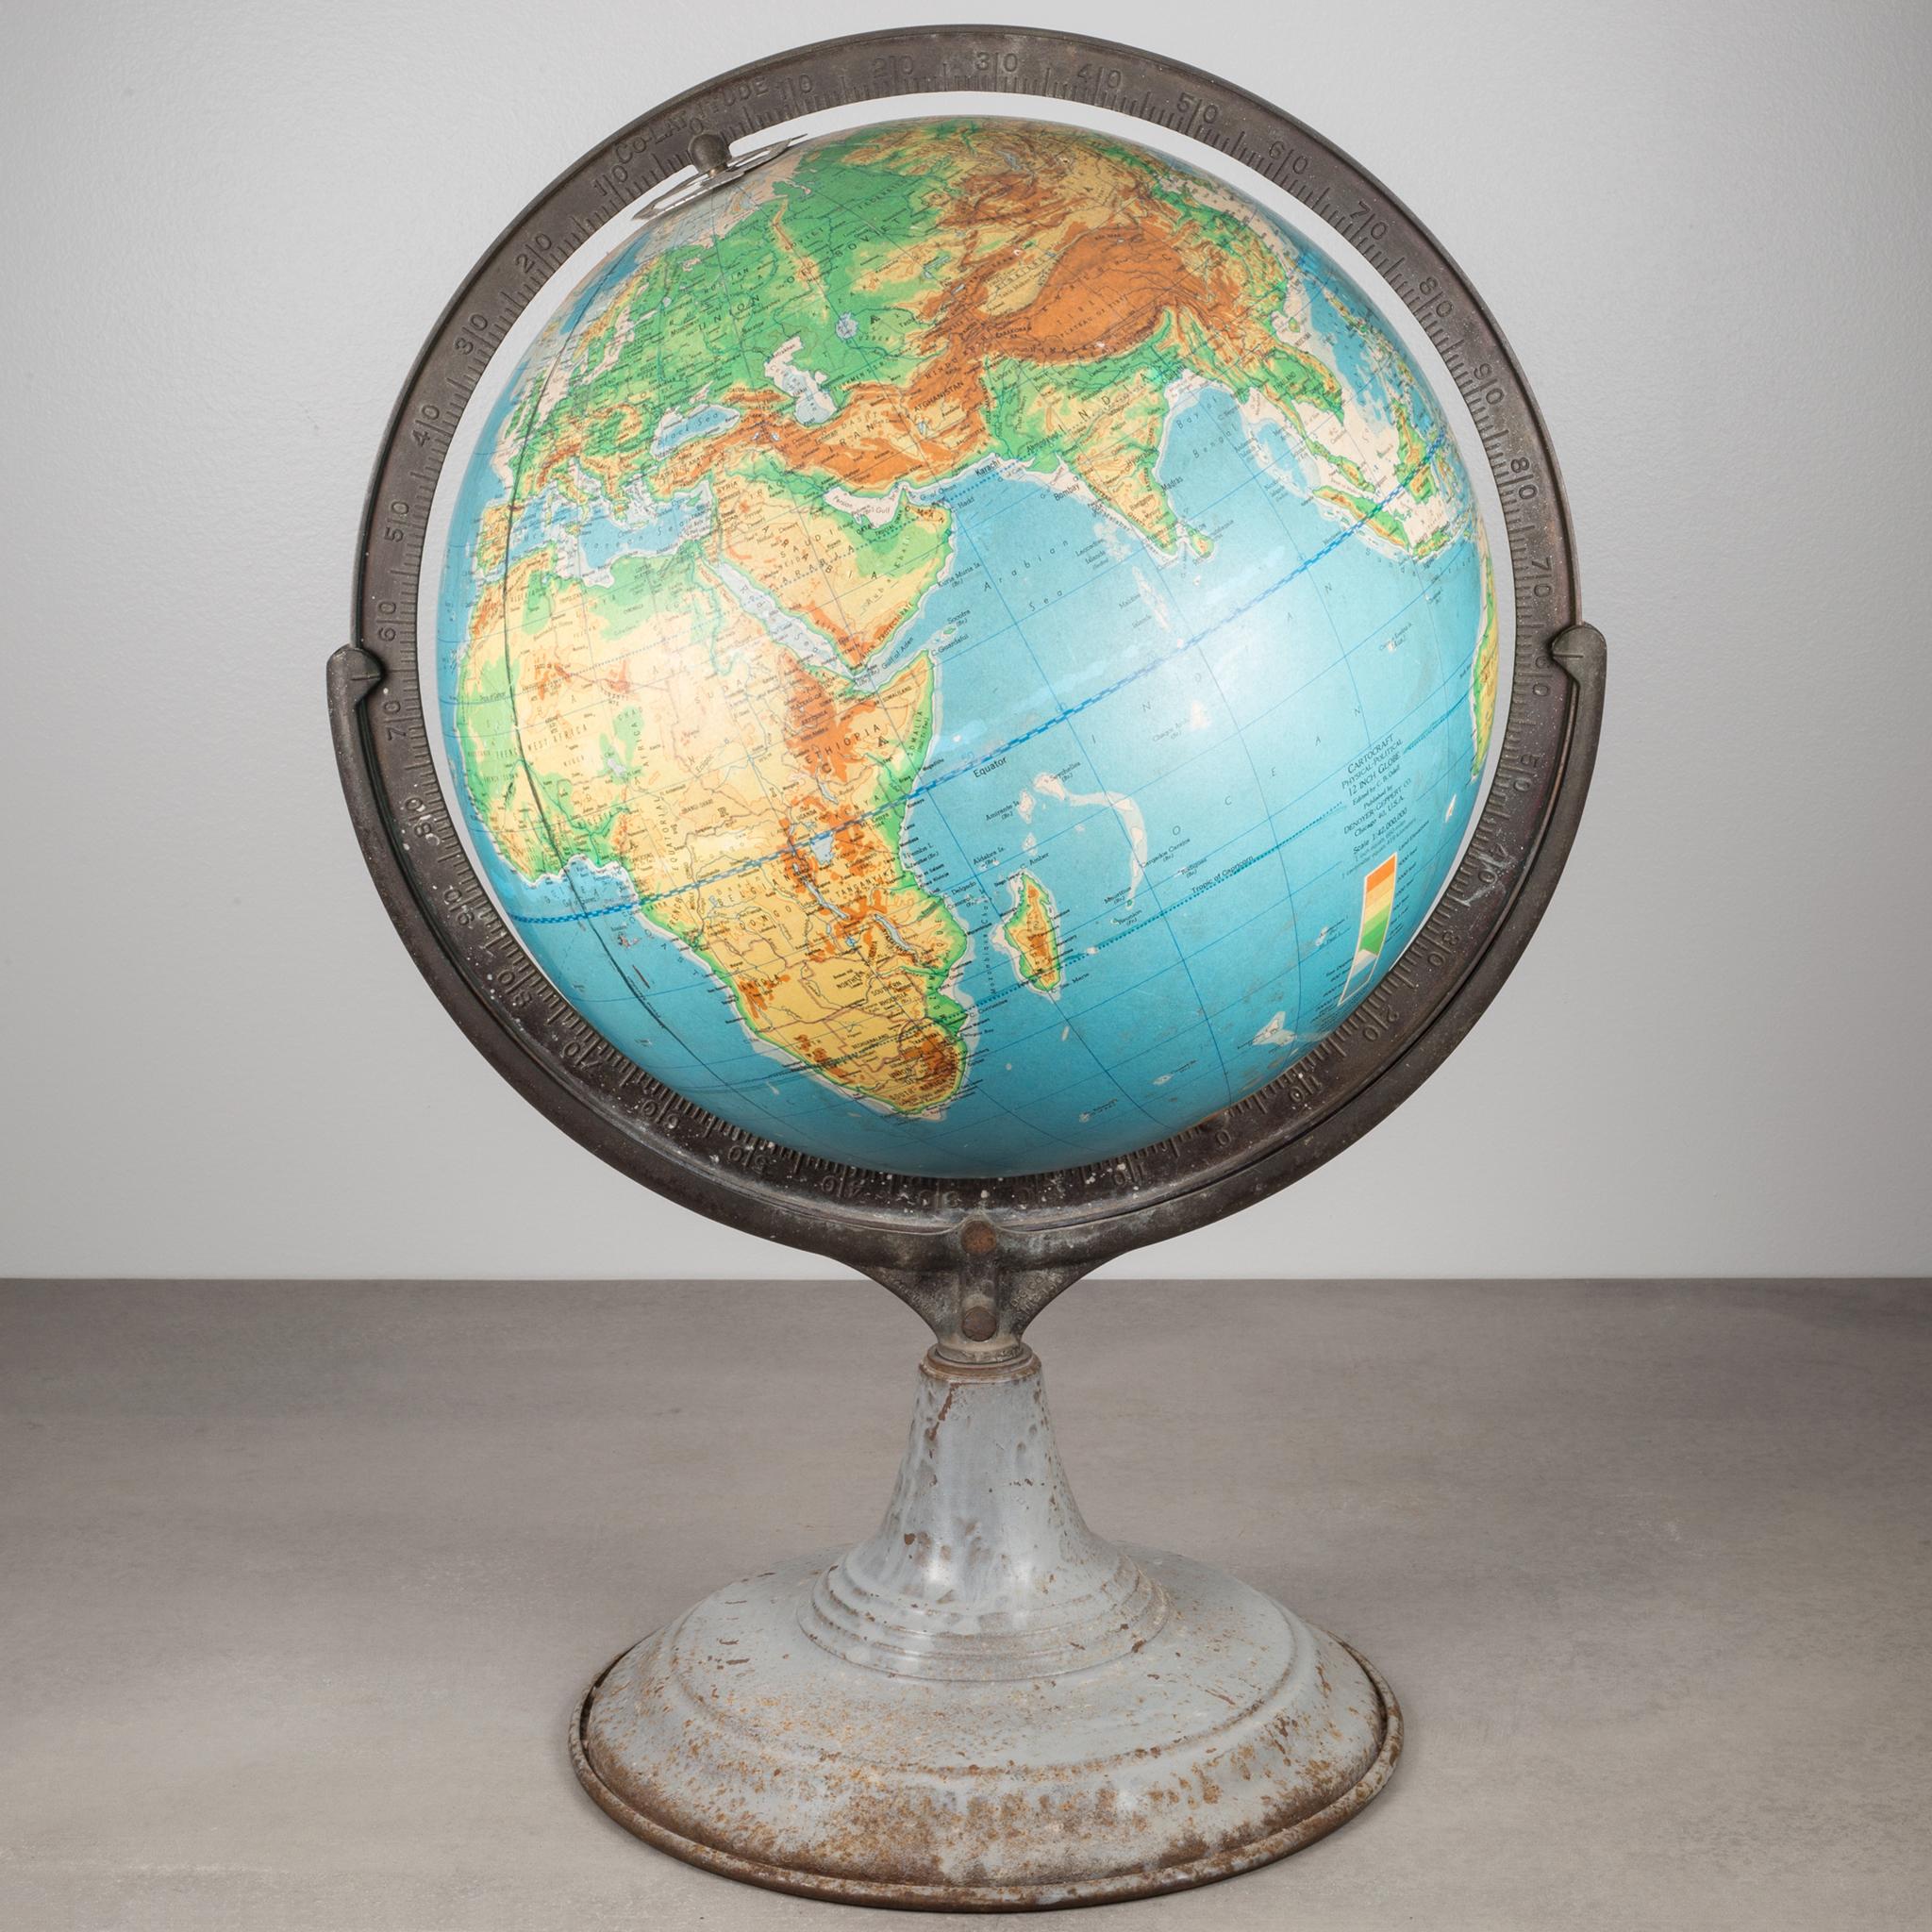 ABOUT

An original cartocraft physical/political 12 inch globe published by Denoyer-Geppert Company. The globe is a 1:42,000,000 scale. The globe is mounted on a metal base with a heavy steel bracket that adjusts within the bracket. A very unusual